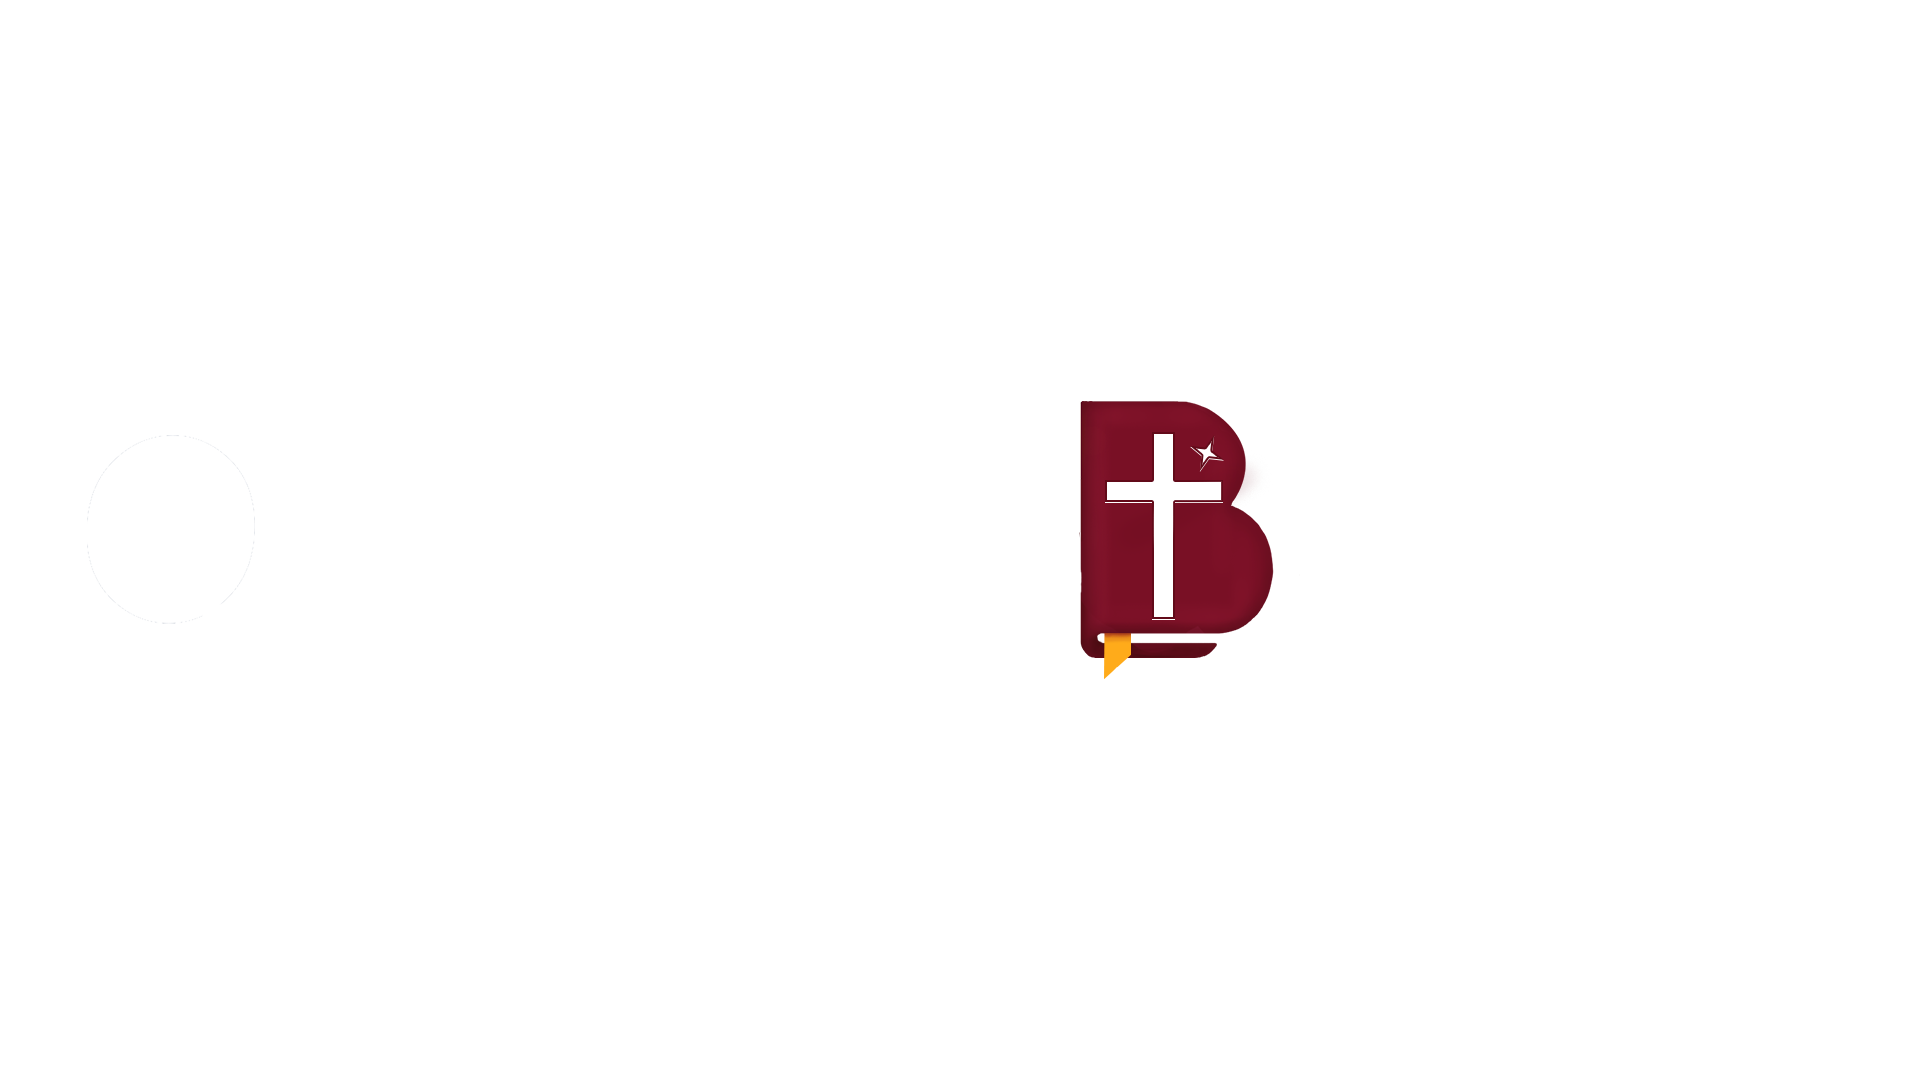 Online Bible: A Free Bible Search and Study Tool